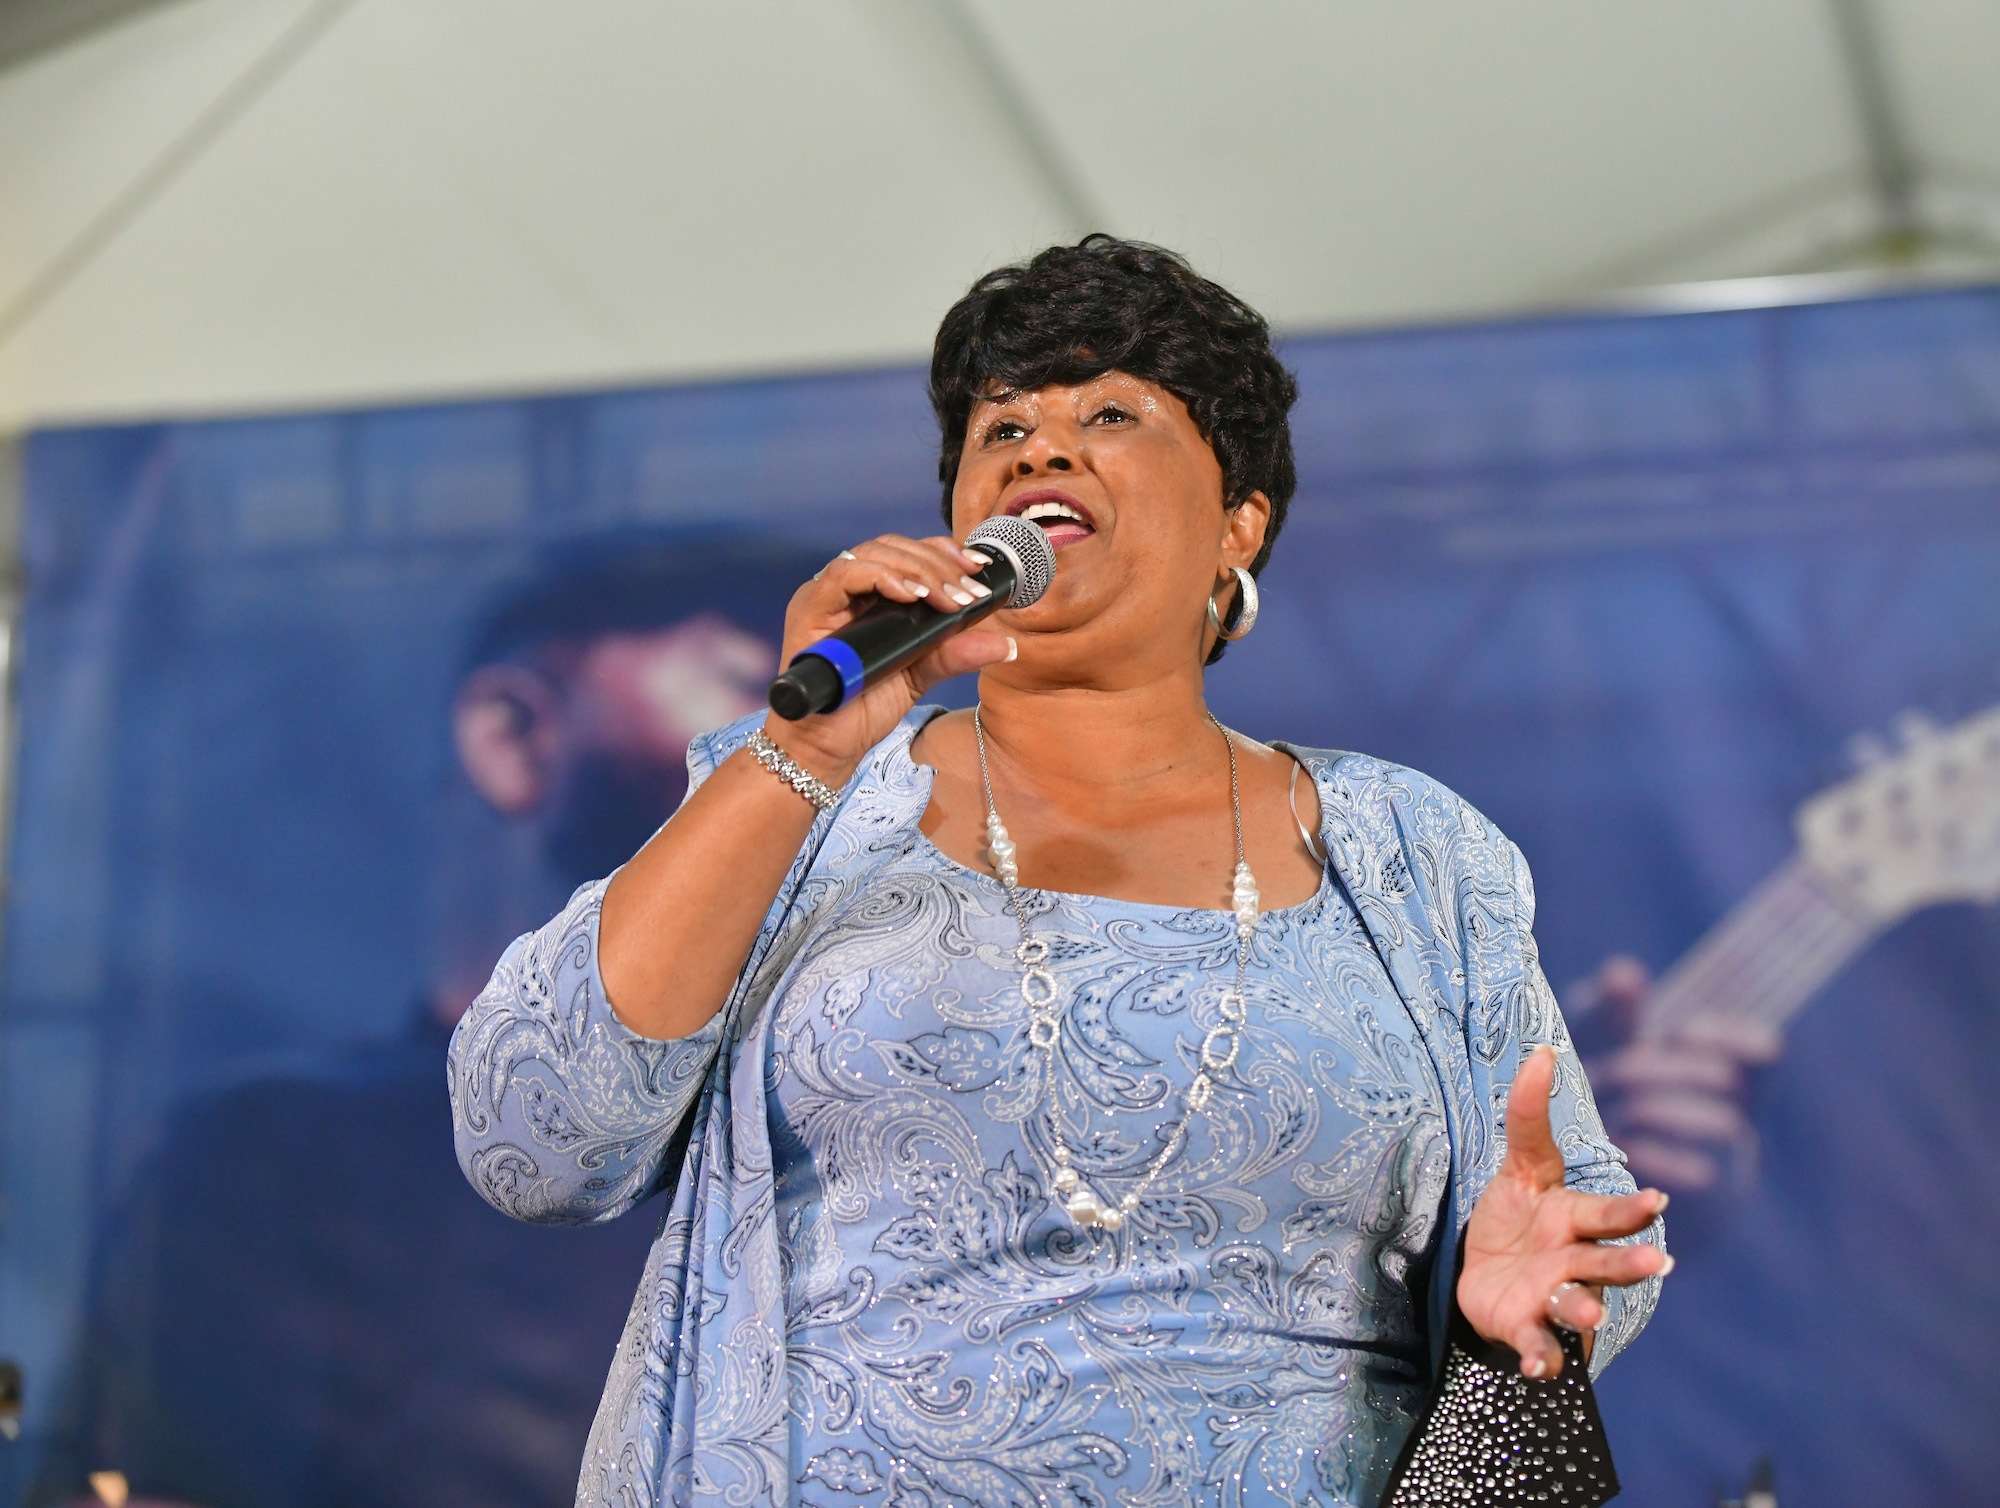 Ms Jody Live At Chicago Blues Fest [GALLERY] 4